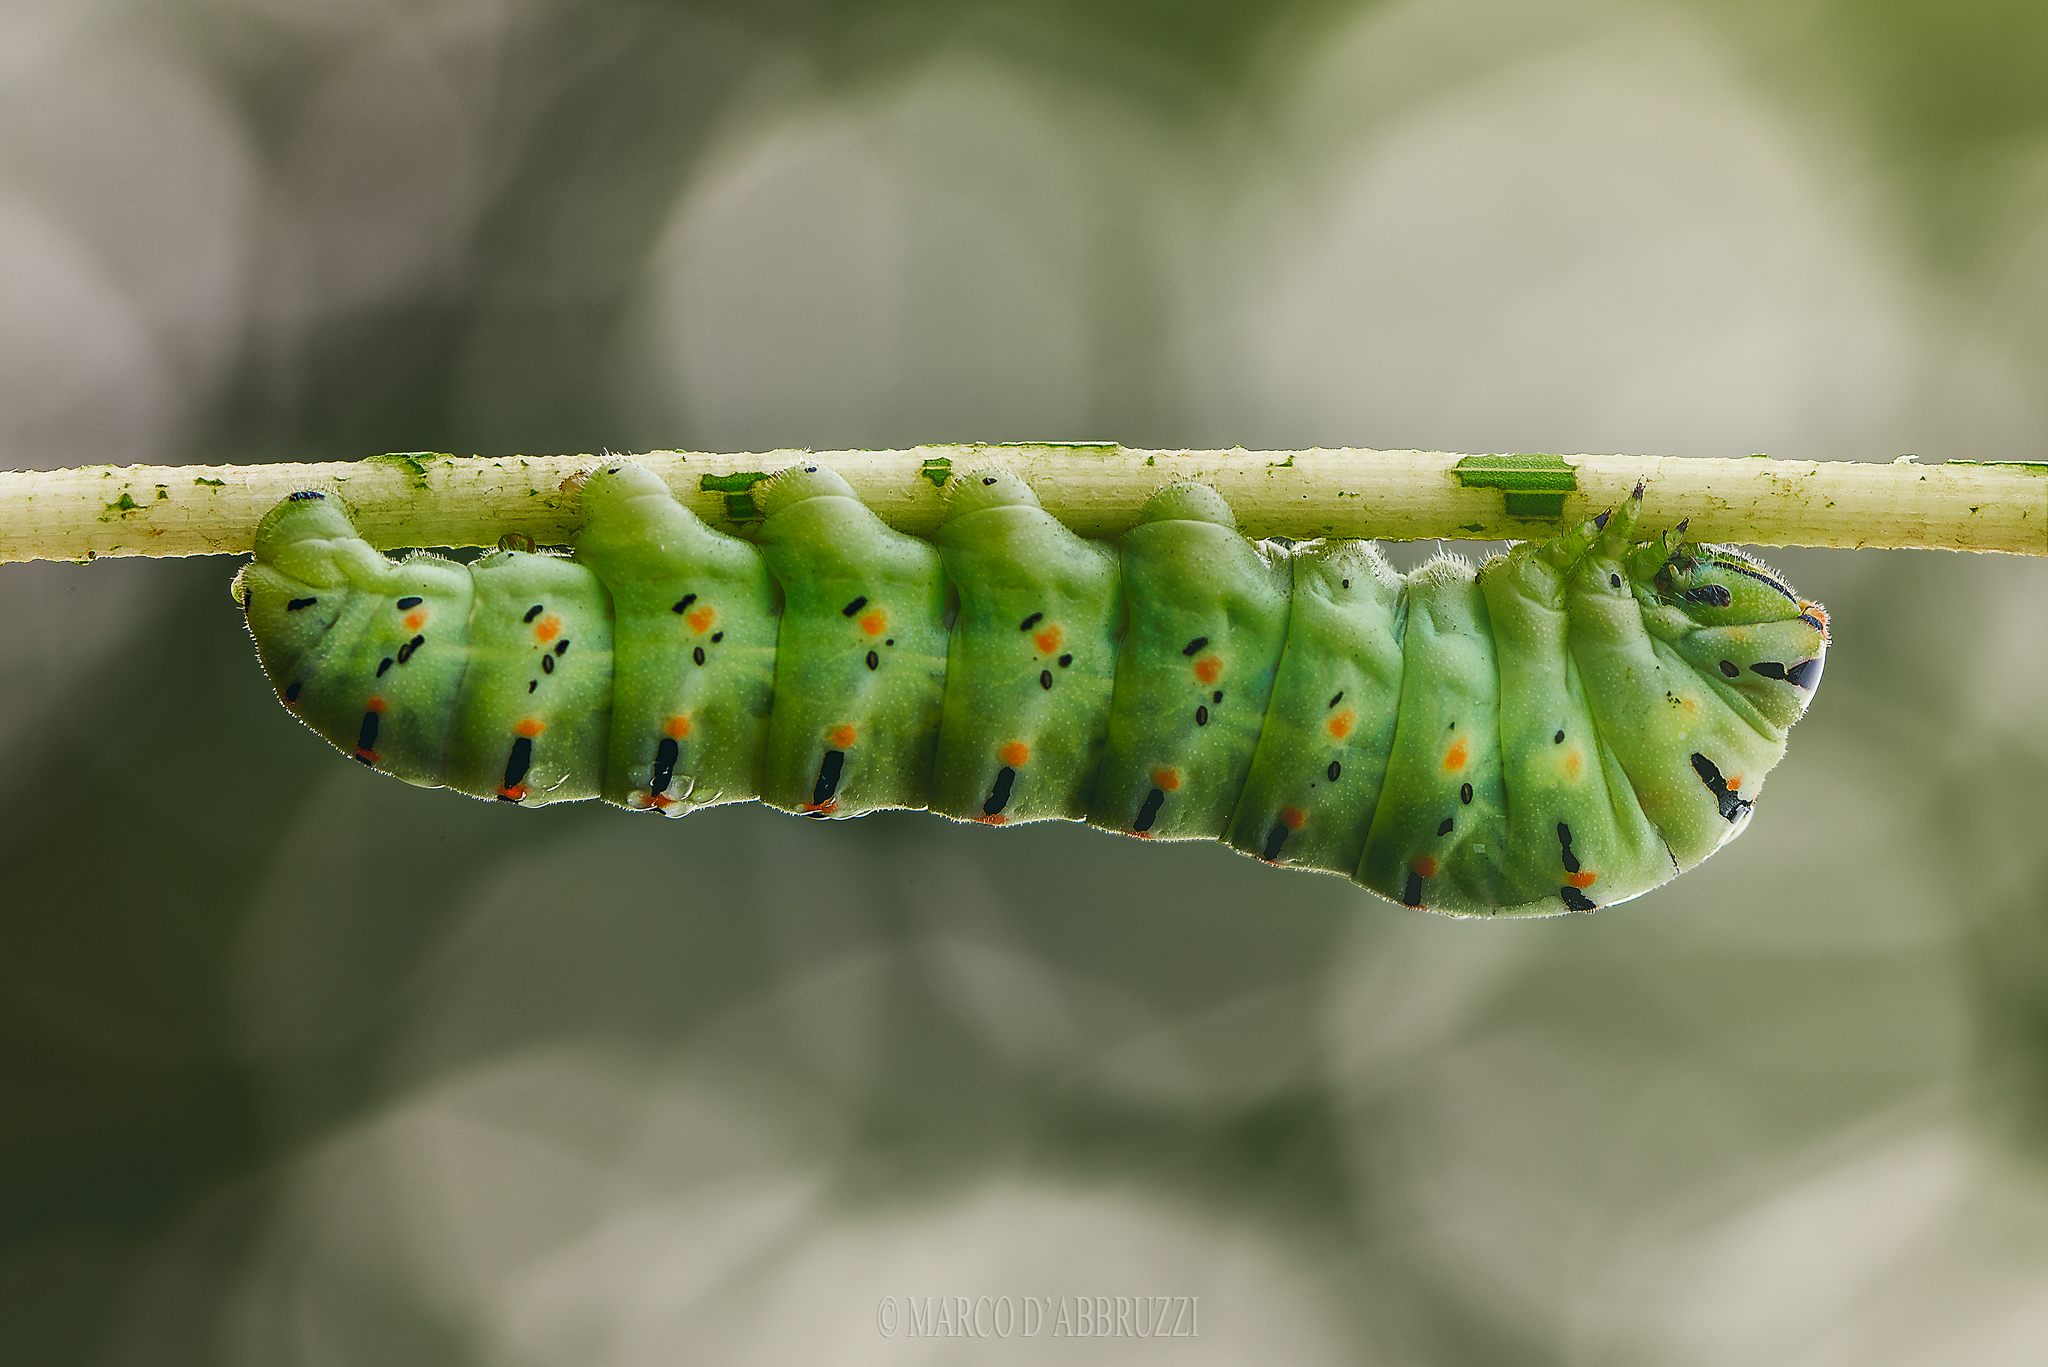 The Hungry Caterpillar ......